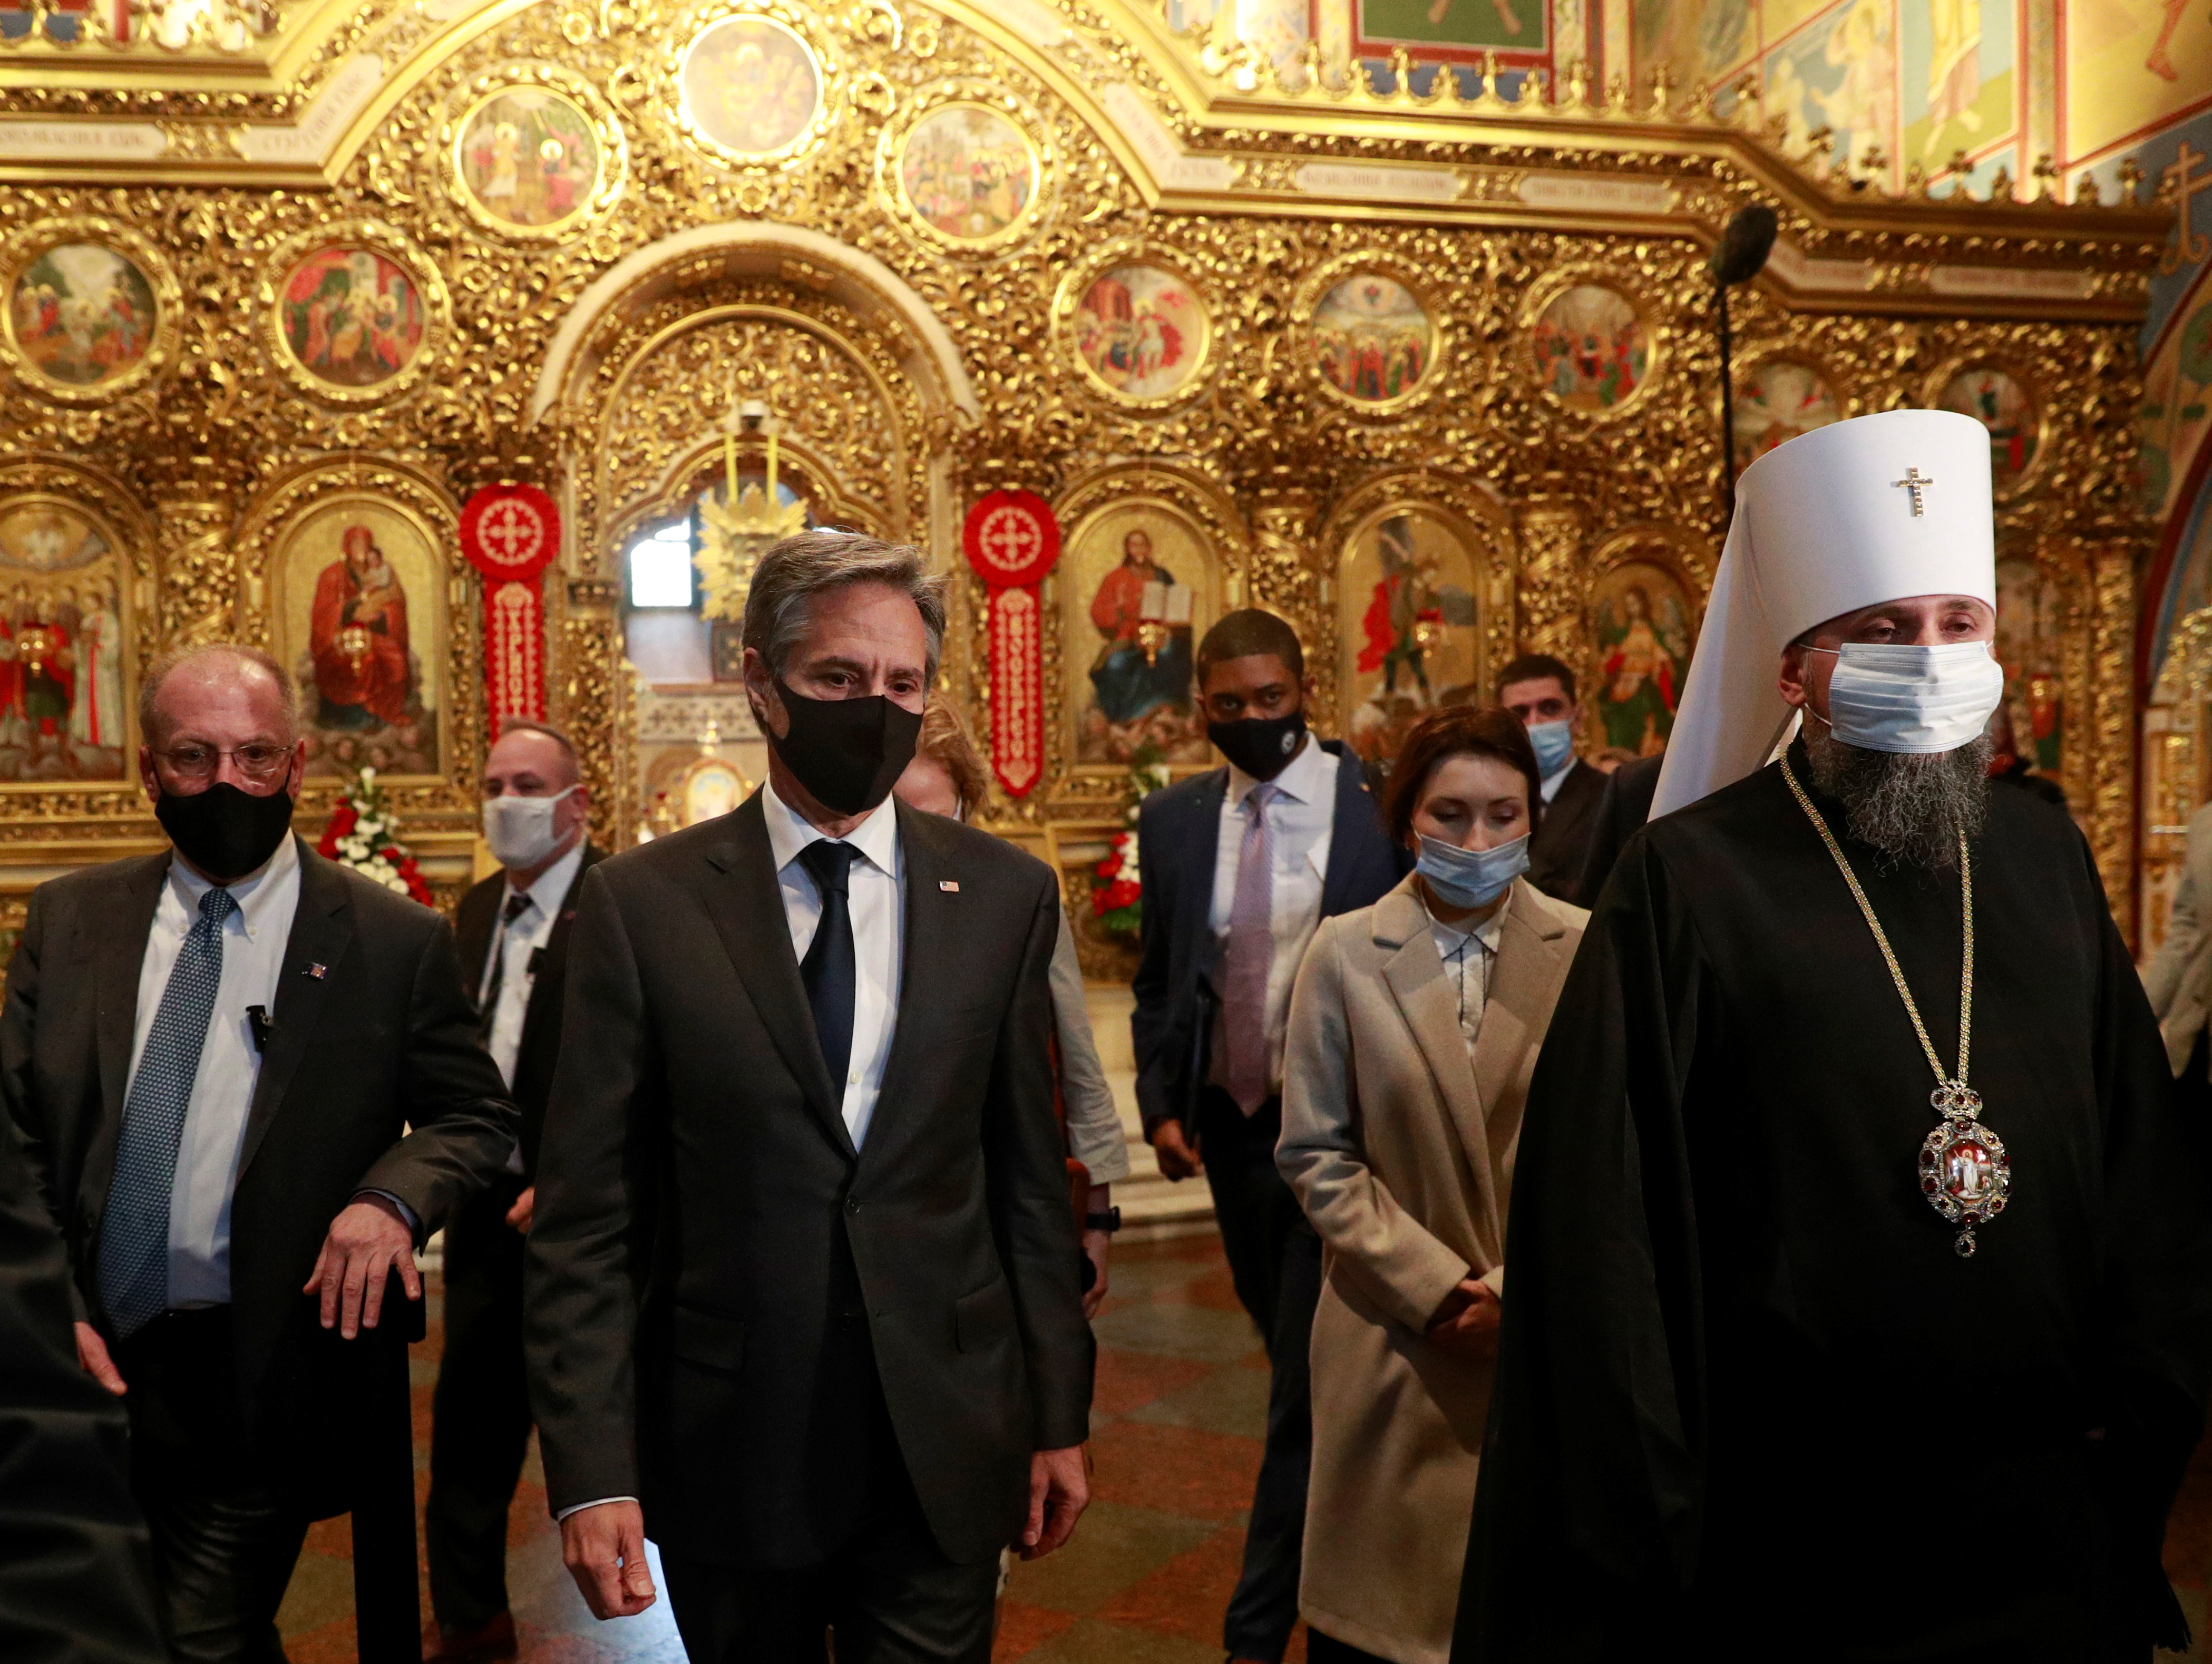 U.S. Secretary of State Antony Blinken visits the St. Michael's Golden-Domed Cathedral in Kyiv